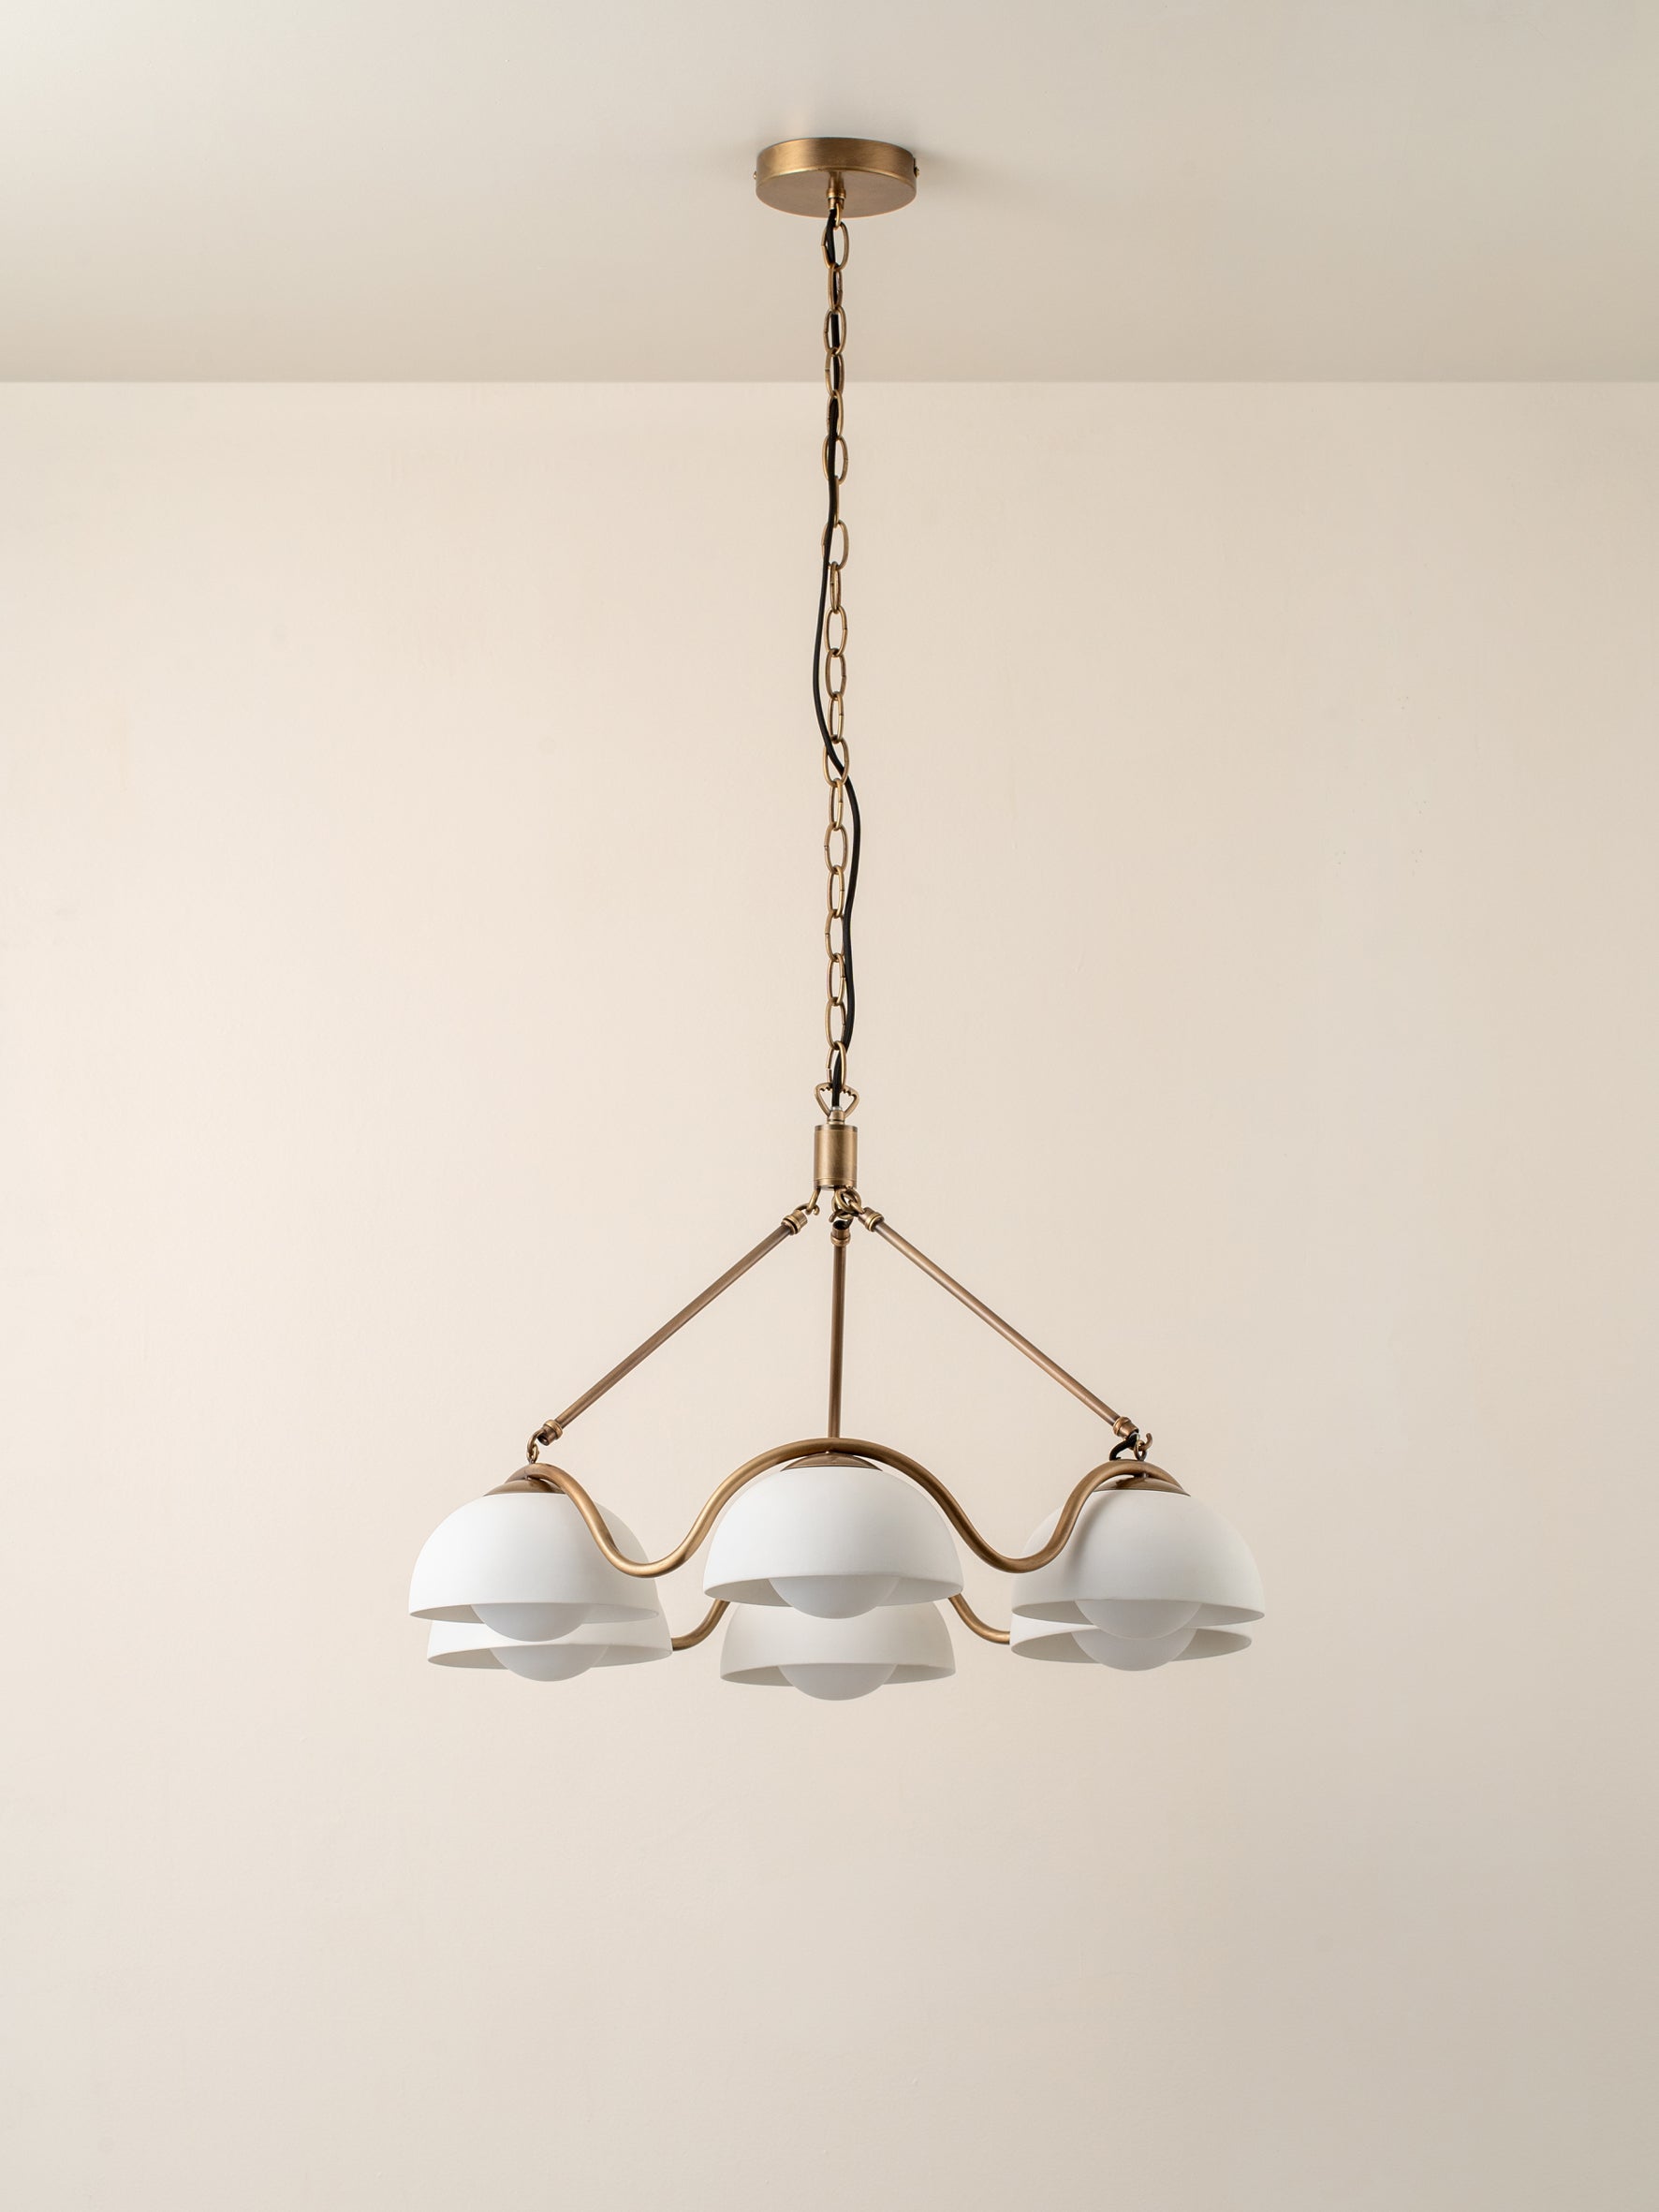 Waverly - 6 light aged brass and white porcelain pendant | Ceiling ...